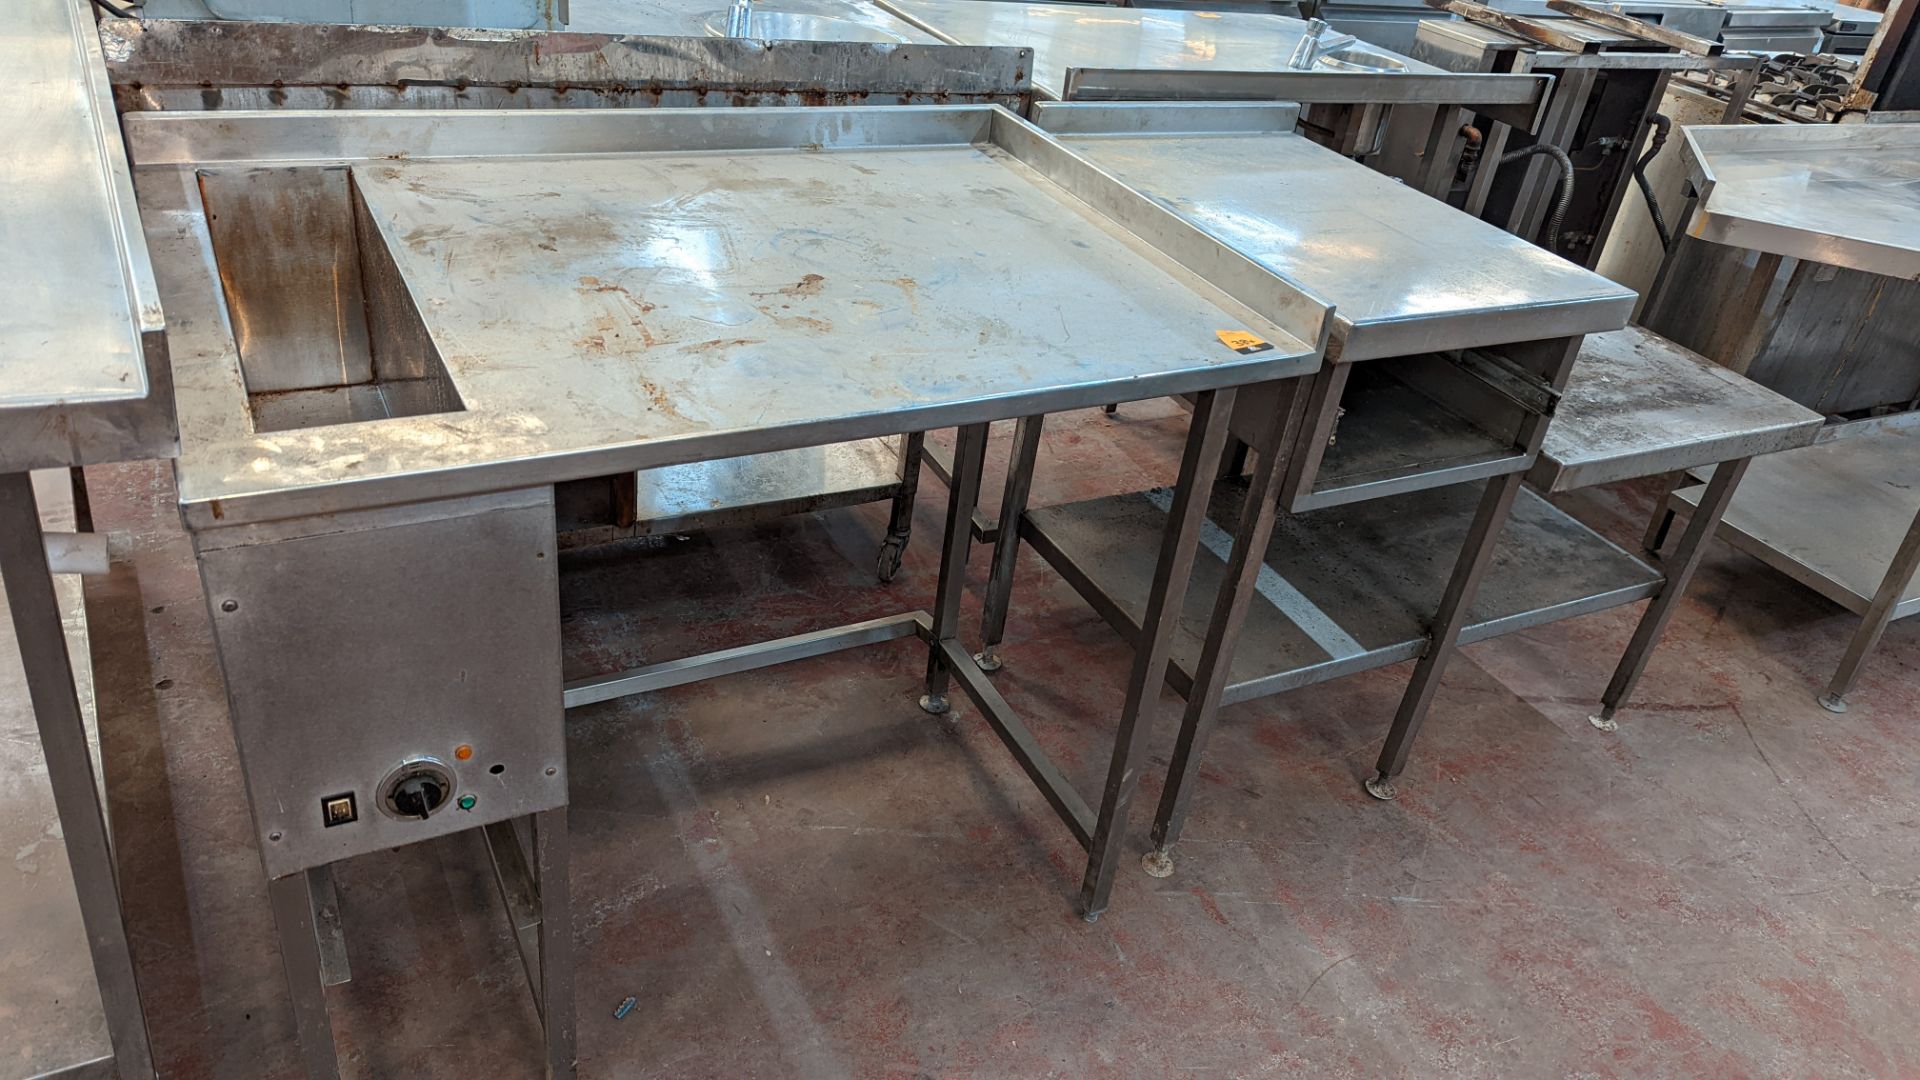 2 off unusually shaped stainless steel tables